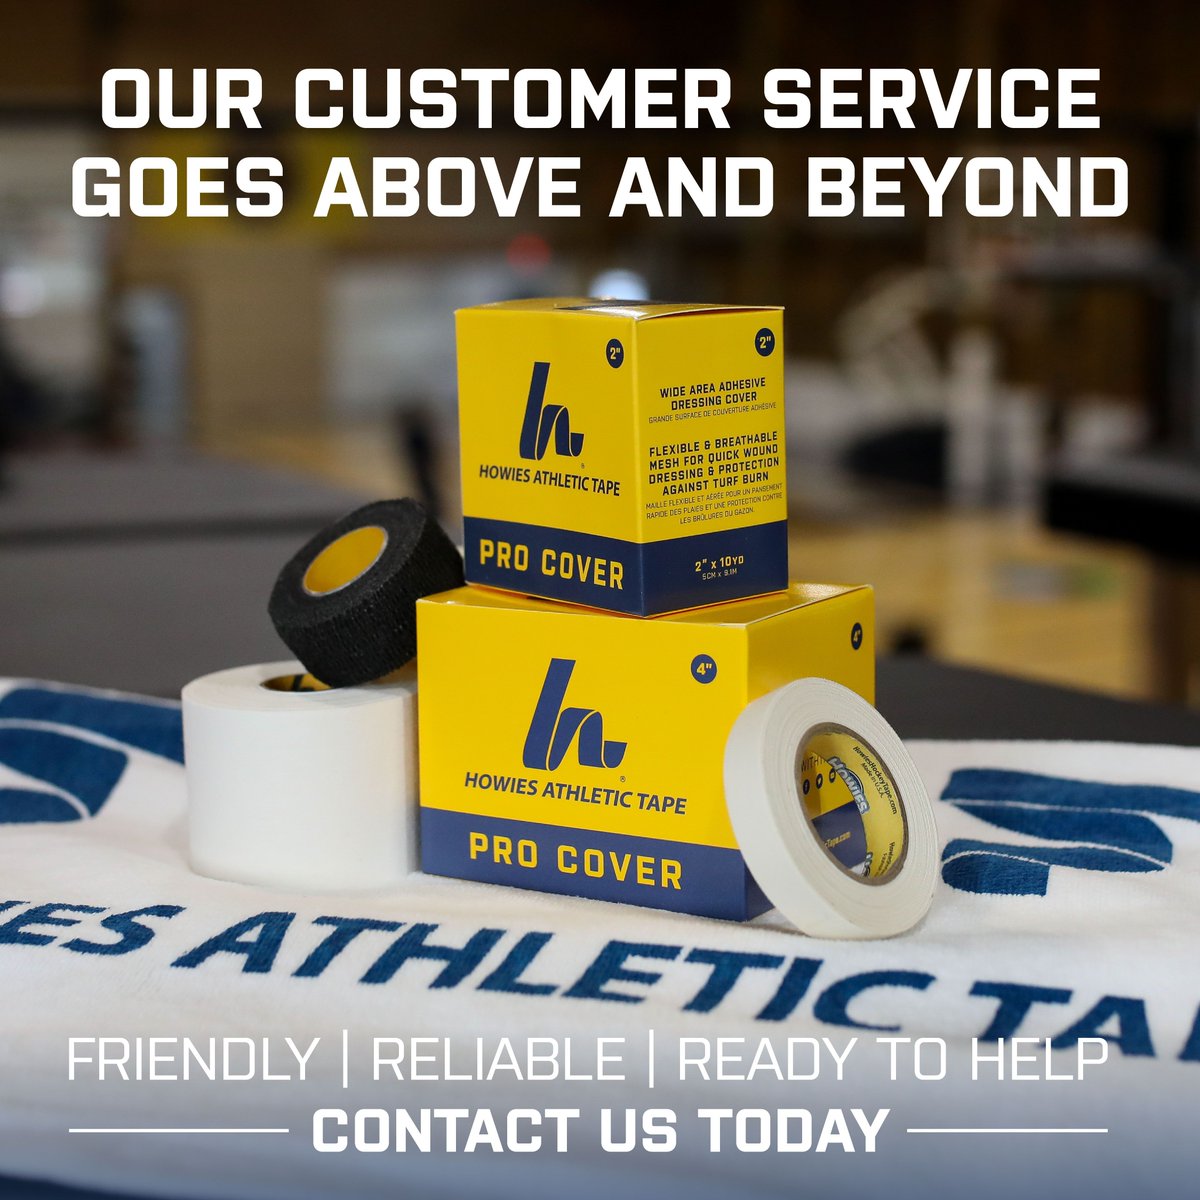 Howies will continue to impress you time & time again with our outstanding Customer Service! Don't believe me? Give us a call and see for yourself! #StickWithTheBest